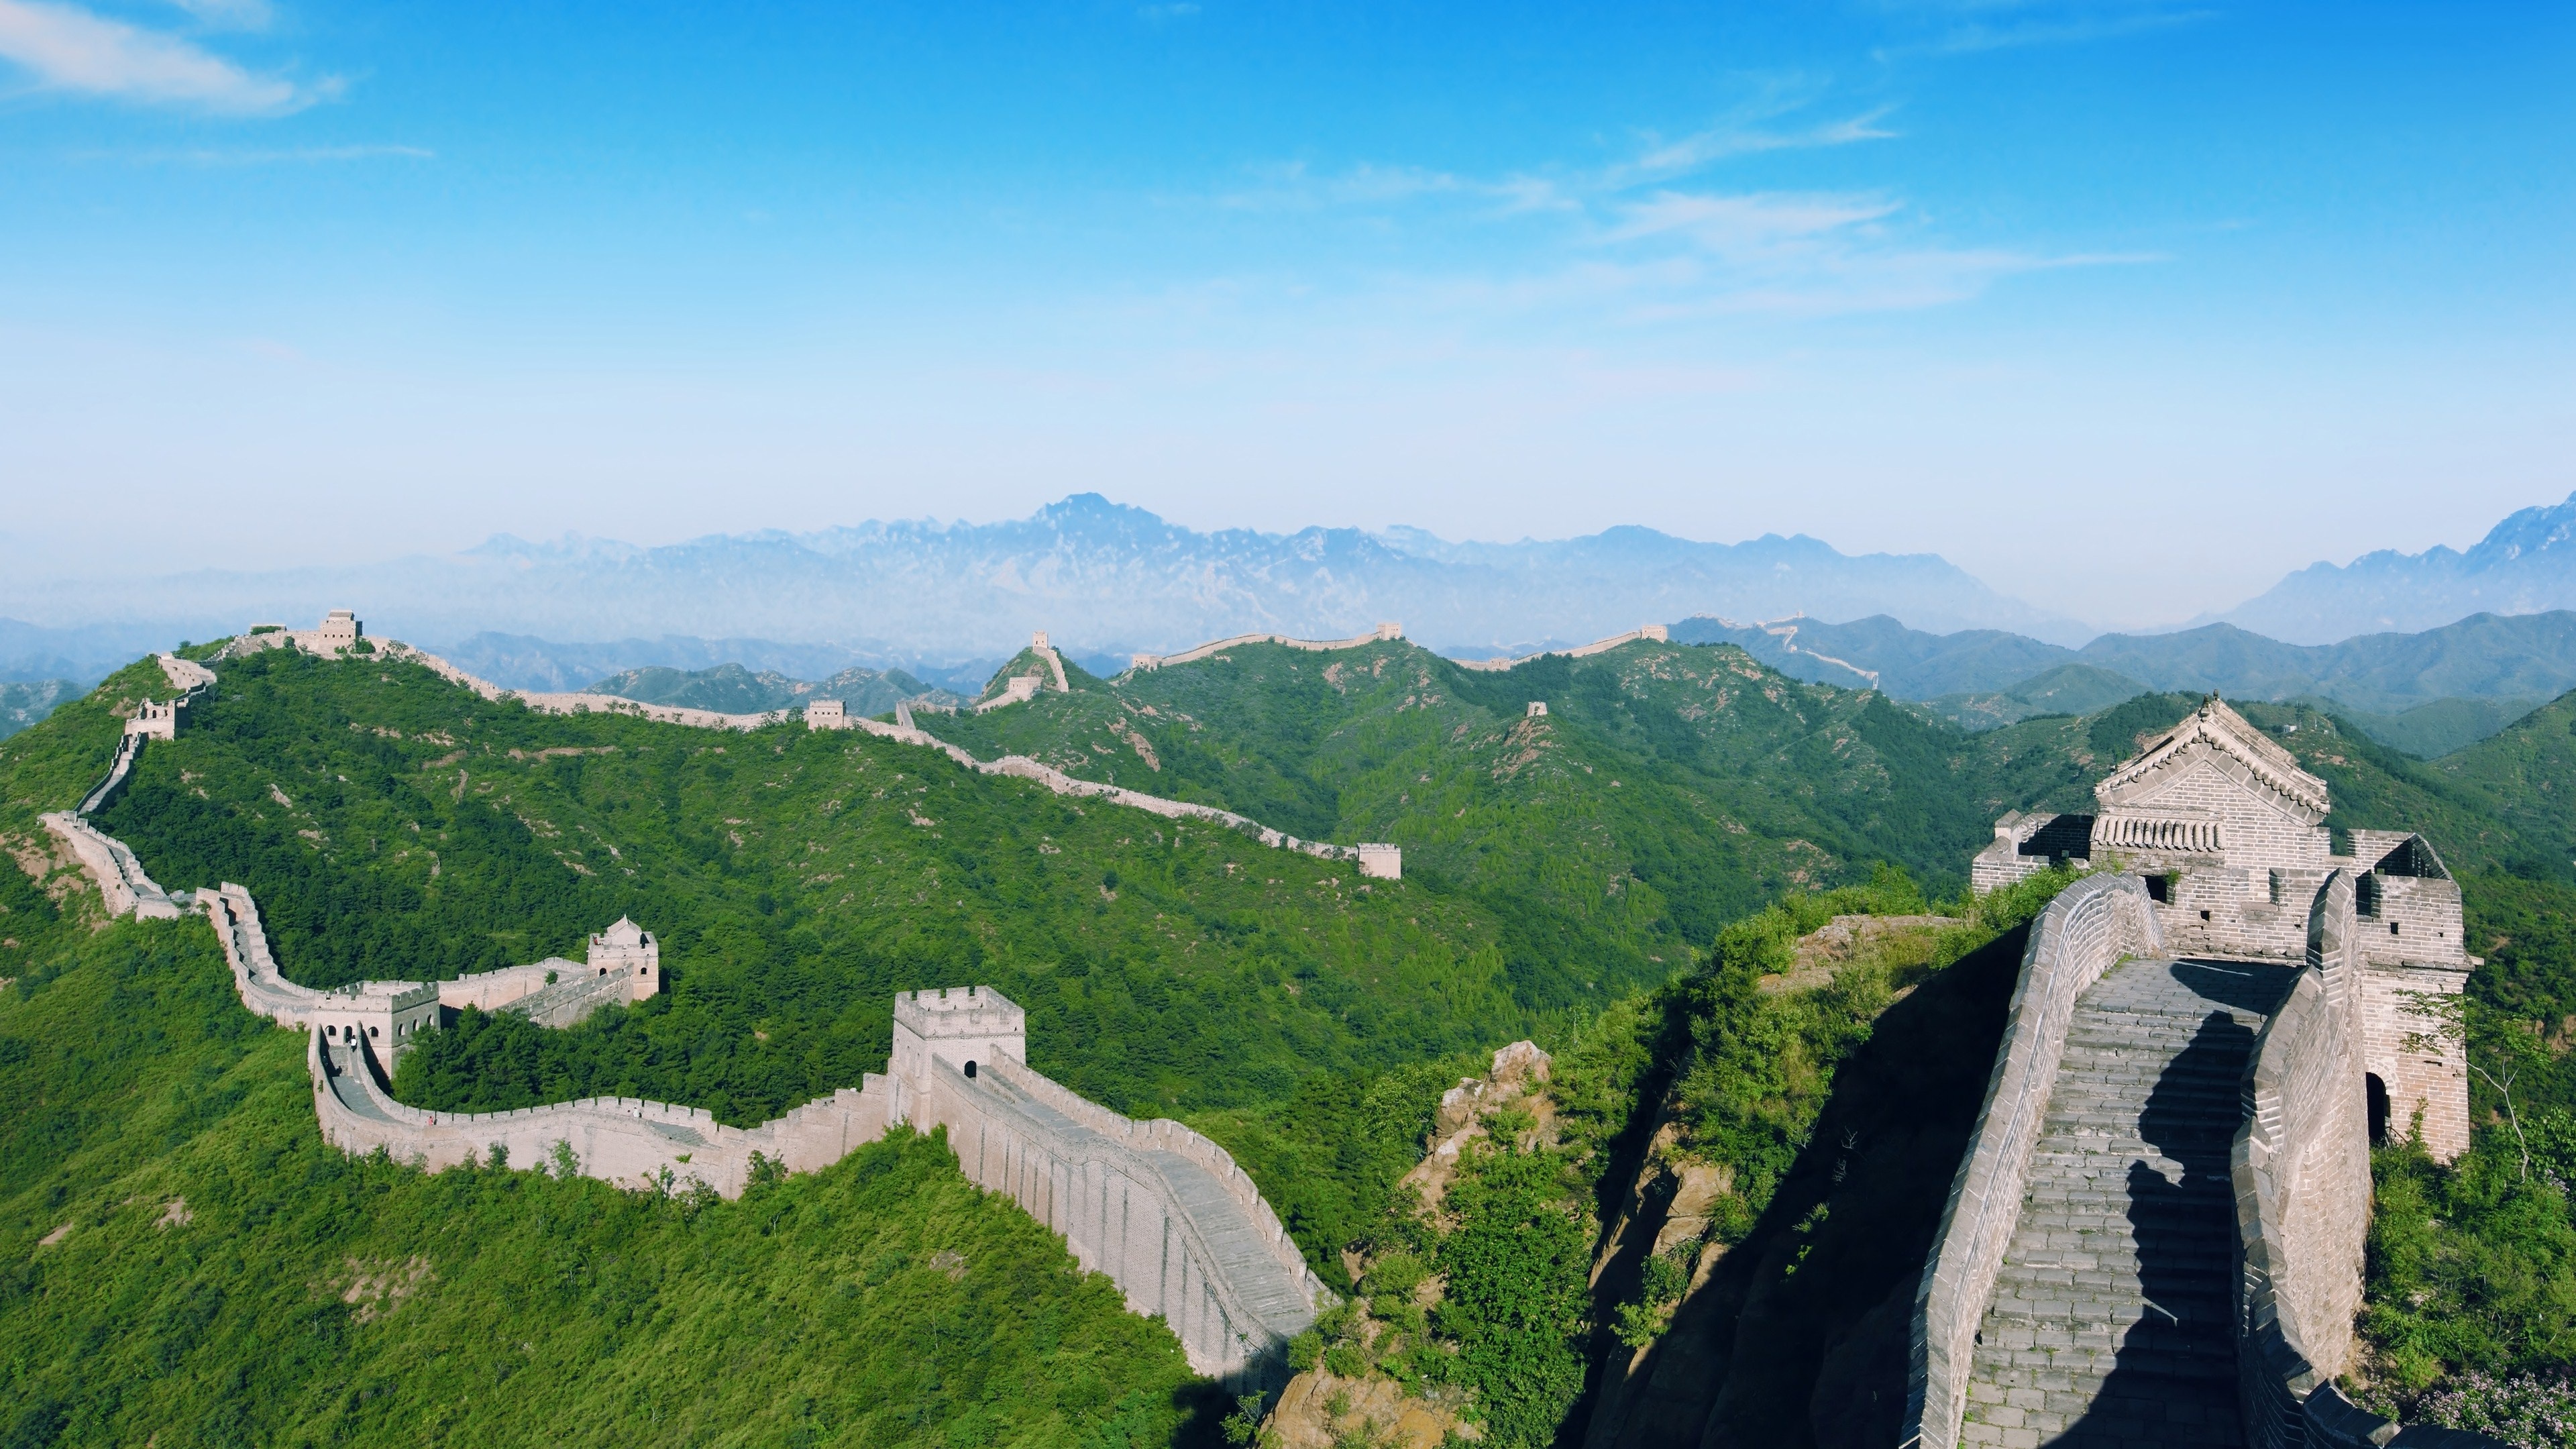 Great Wall of China, UNESCO World Heritage Site, Iconic landmark, Historical fortification, 3840x2160 4K Desktop